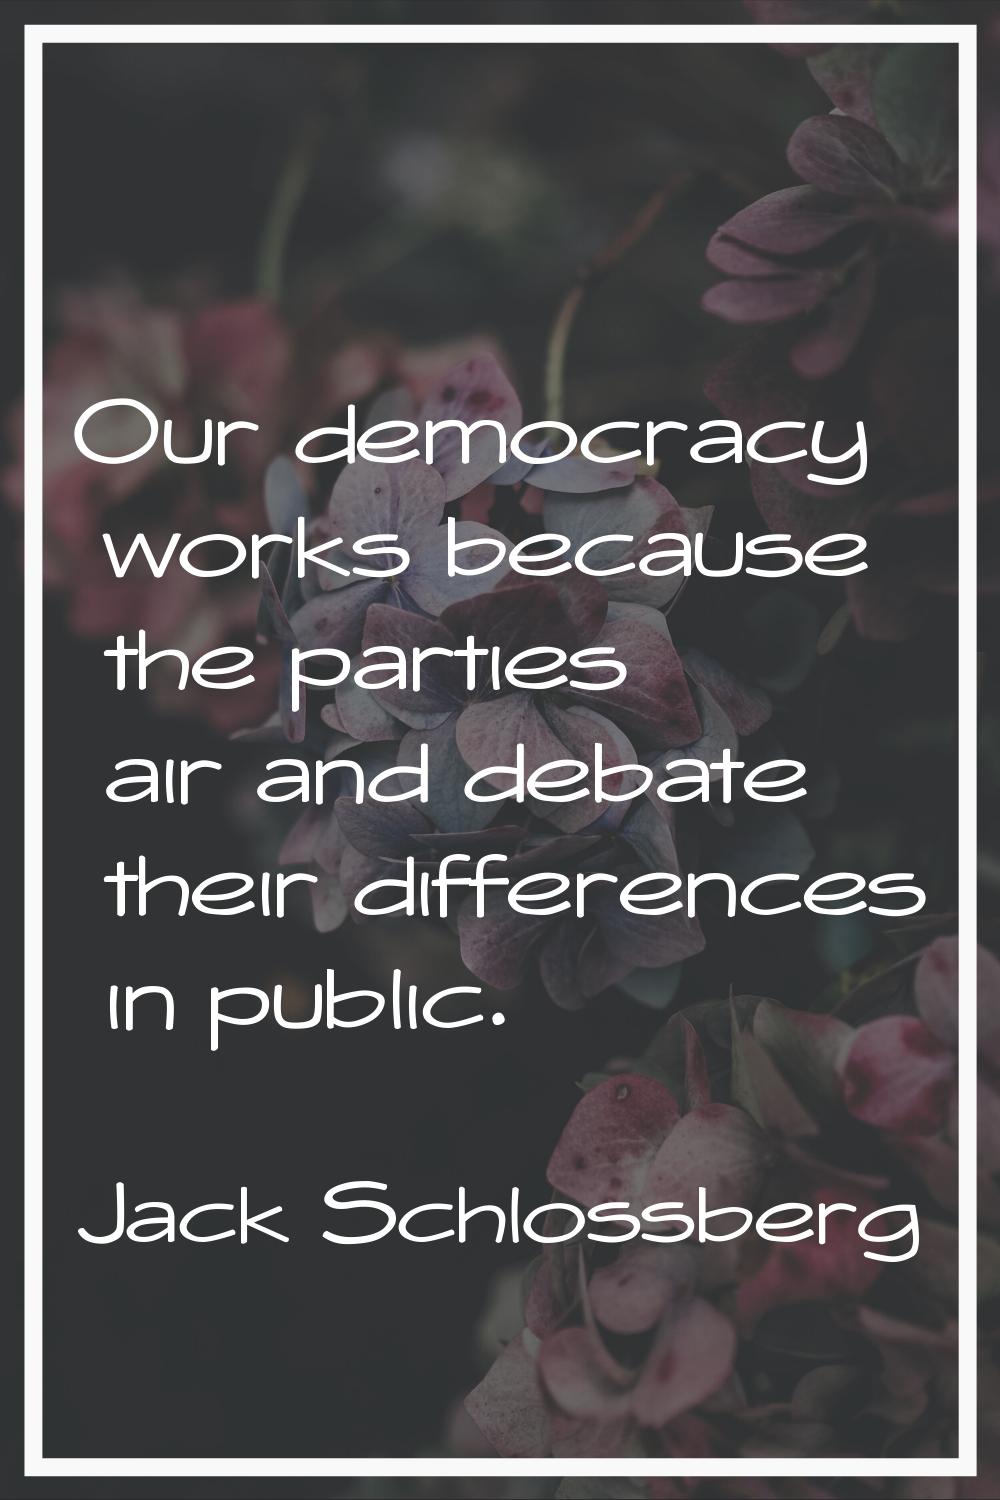 Our democracy works because the parties air and debate their differences in public.